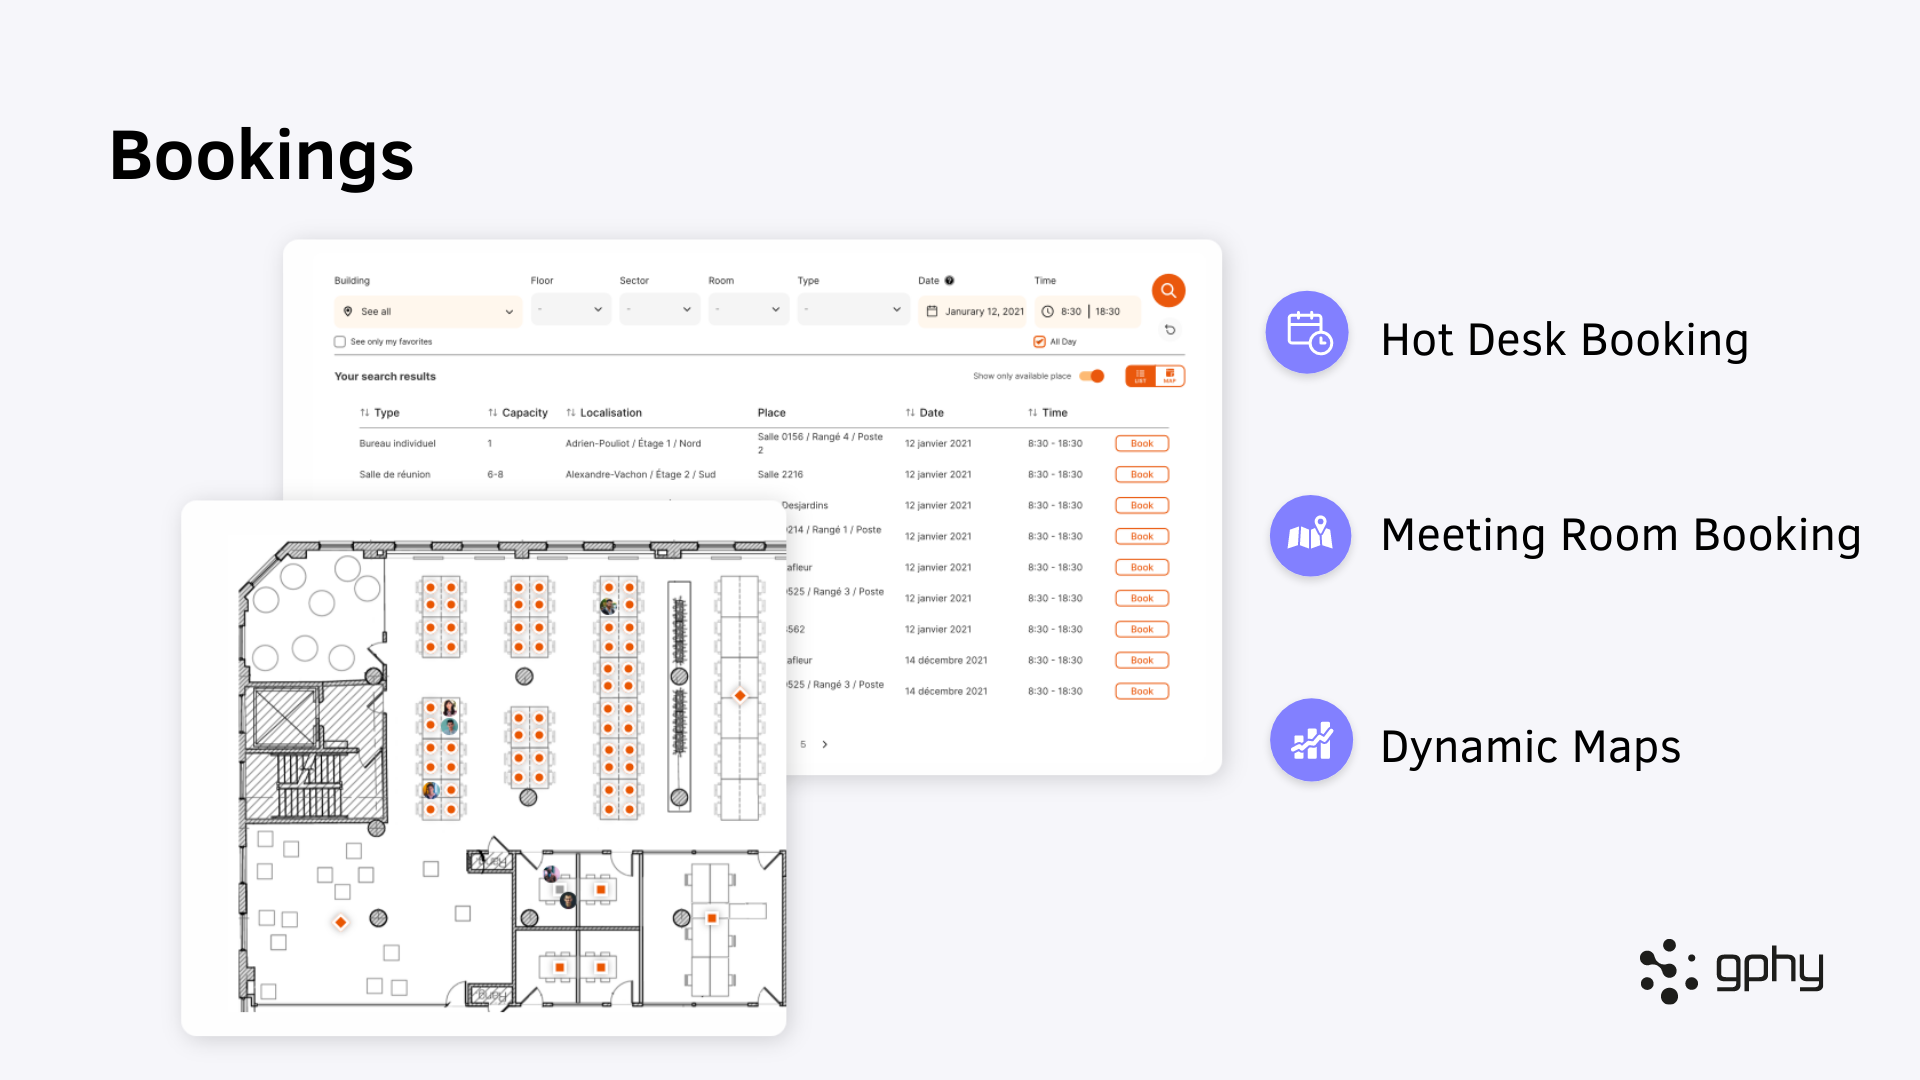 Users can book desks and meeting rooms directly through our interactive maps and our set of intuitive filters. Ensure your employees can always work in an environment that suits their needs.